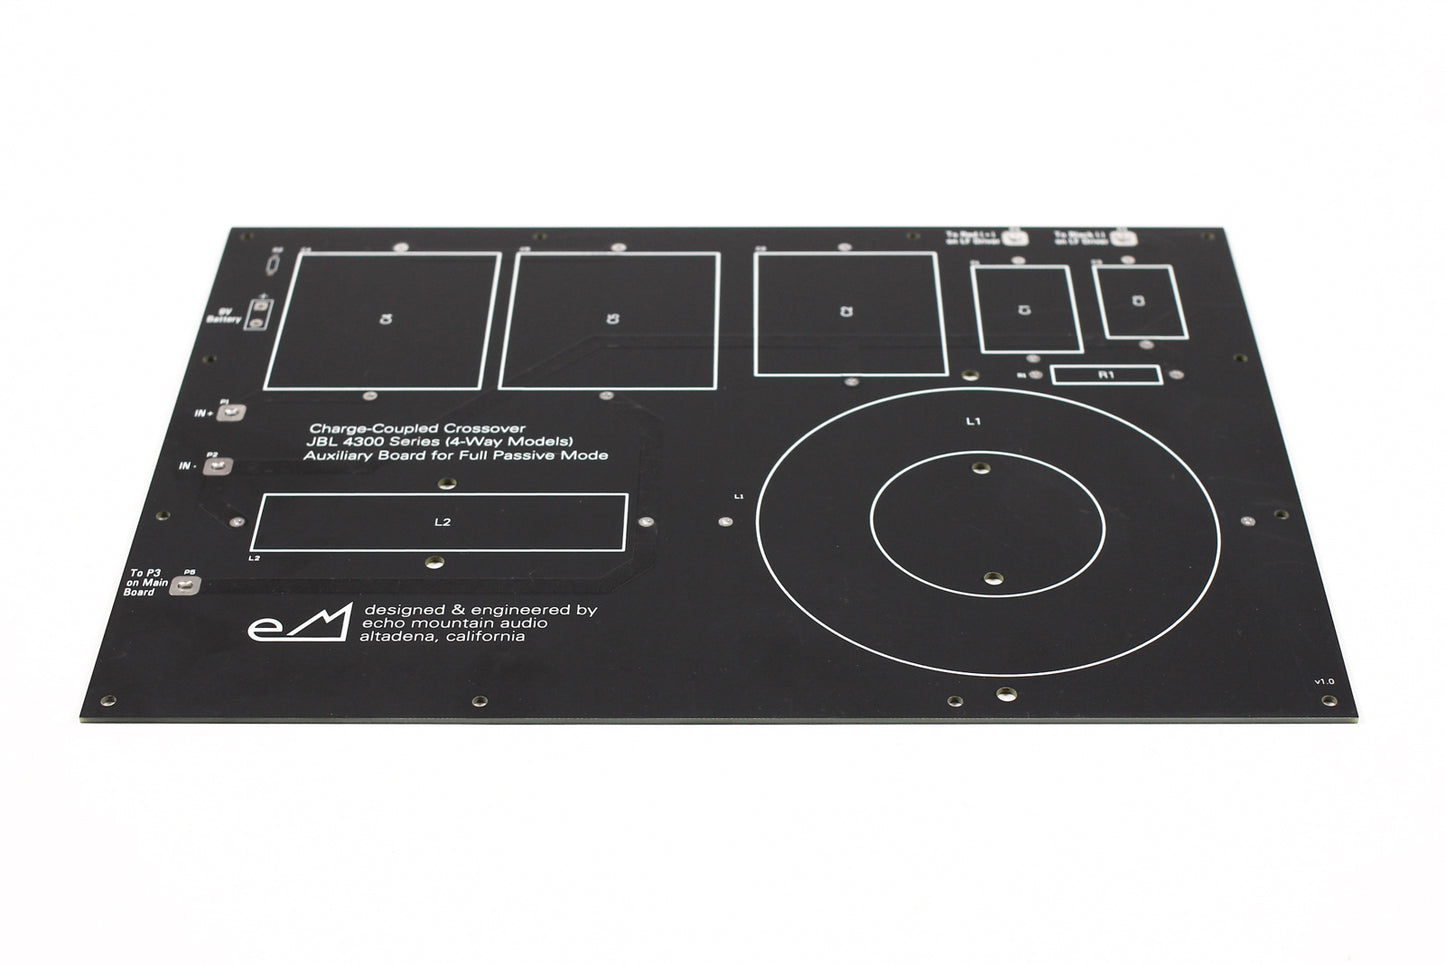 Auxiliary Boards for JBL 4300 Series 4-way Models